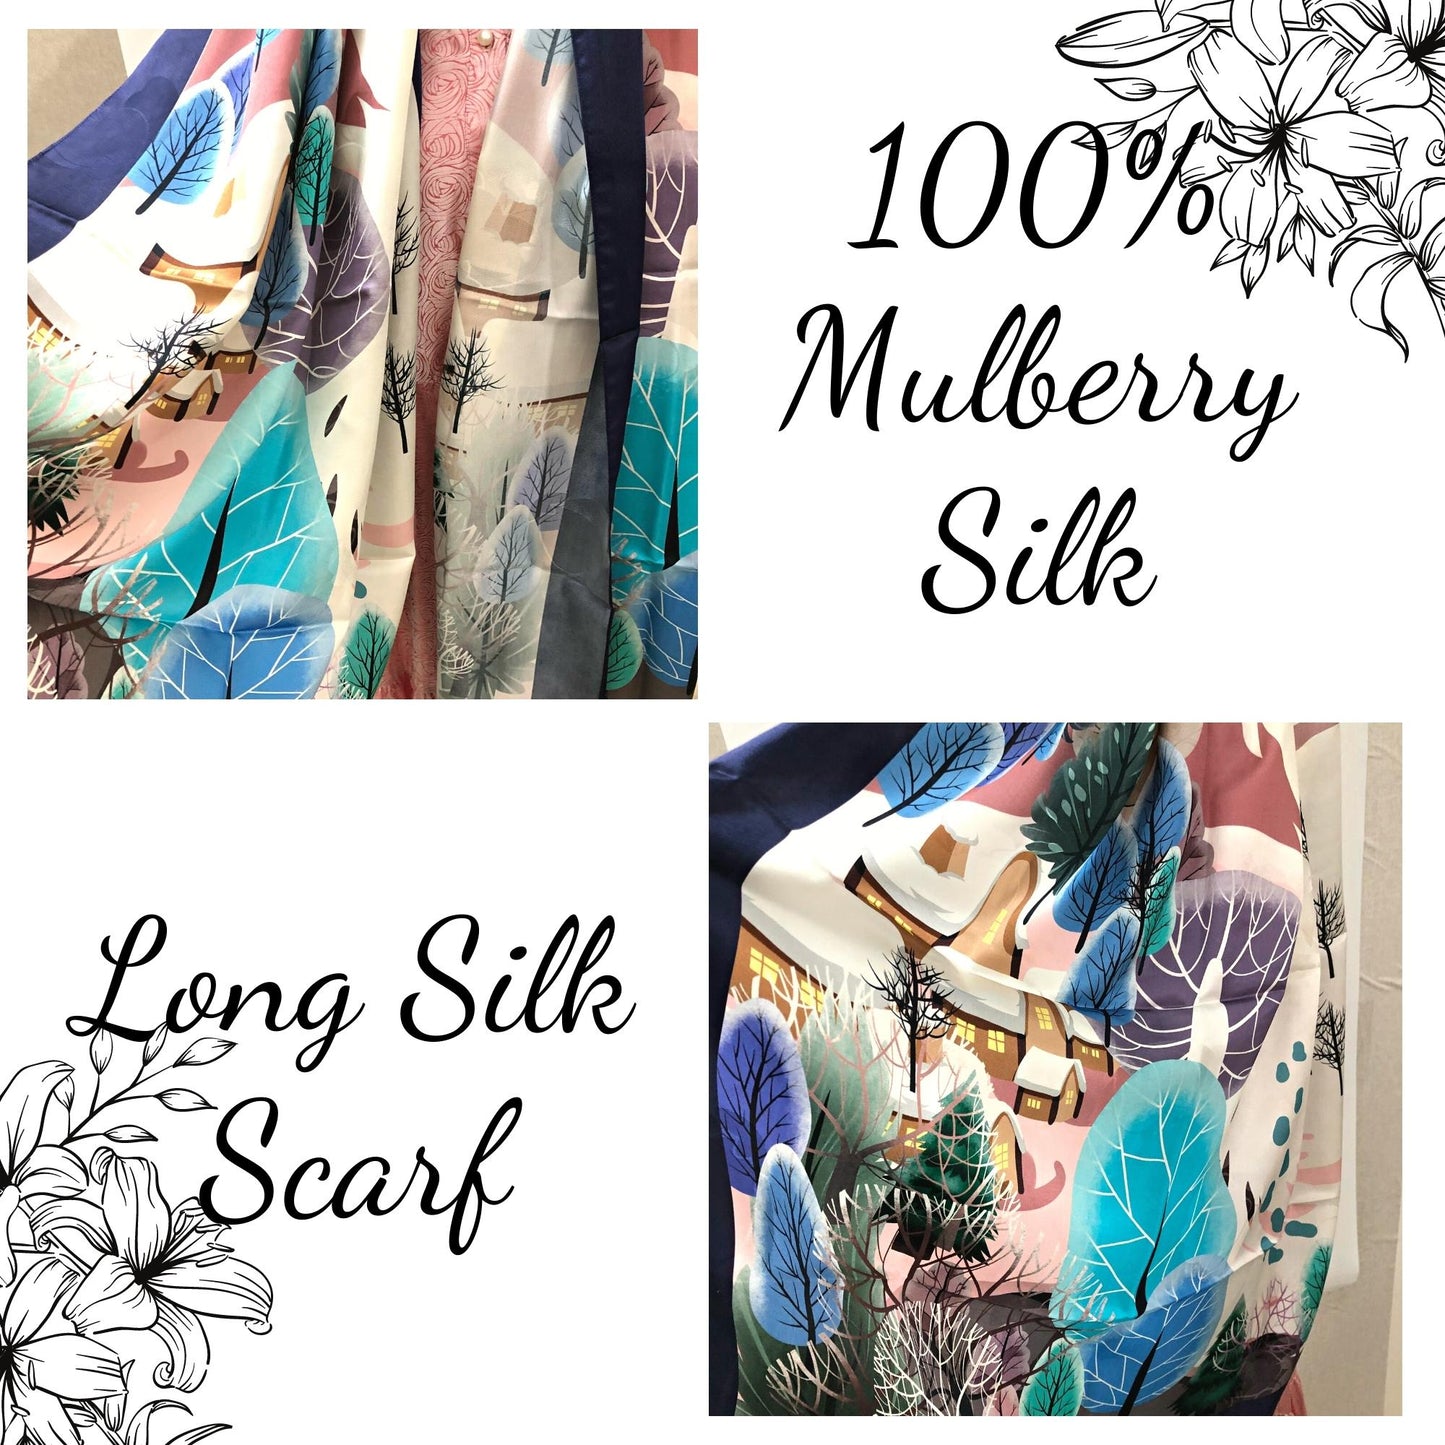 100% MULBERRY SILK SCARF - Long Silk Scarf - Luxury Scarf for Women - Smooth and Lightweight Scarves - Gift for women